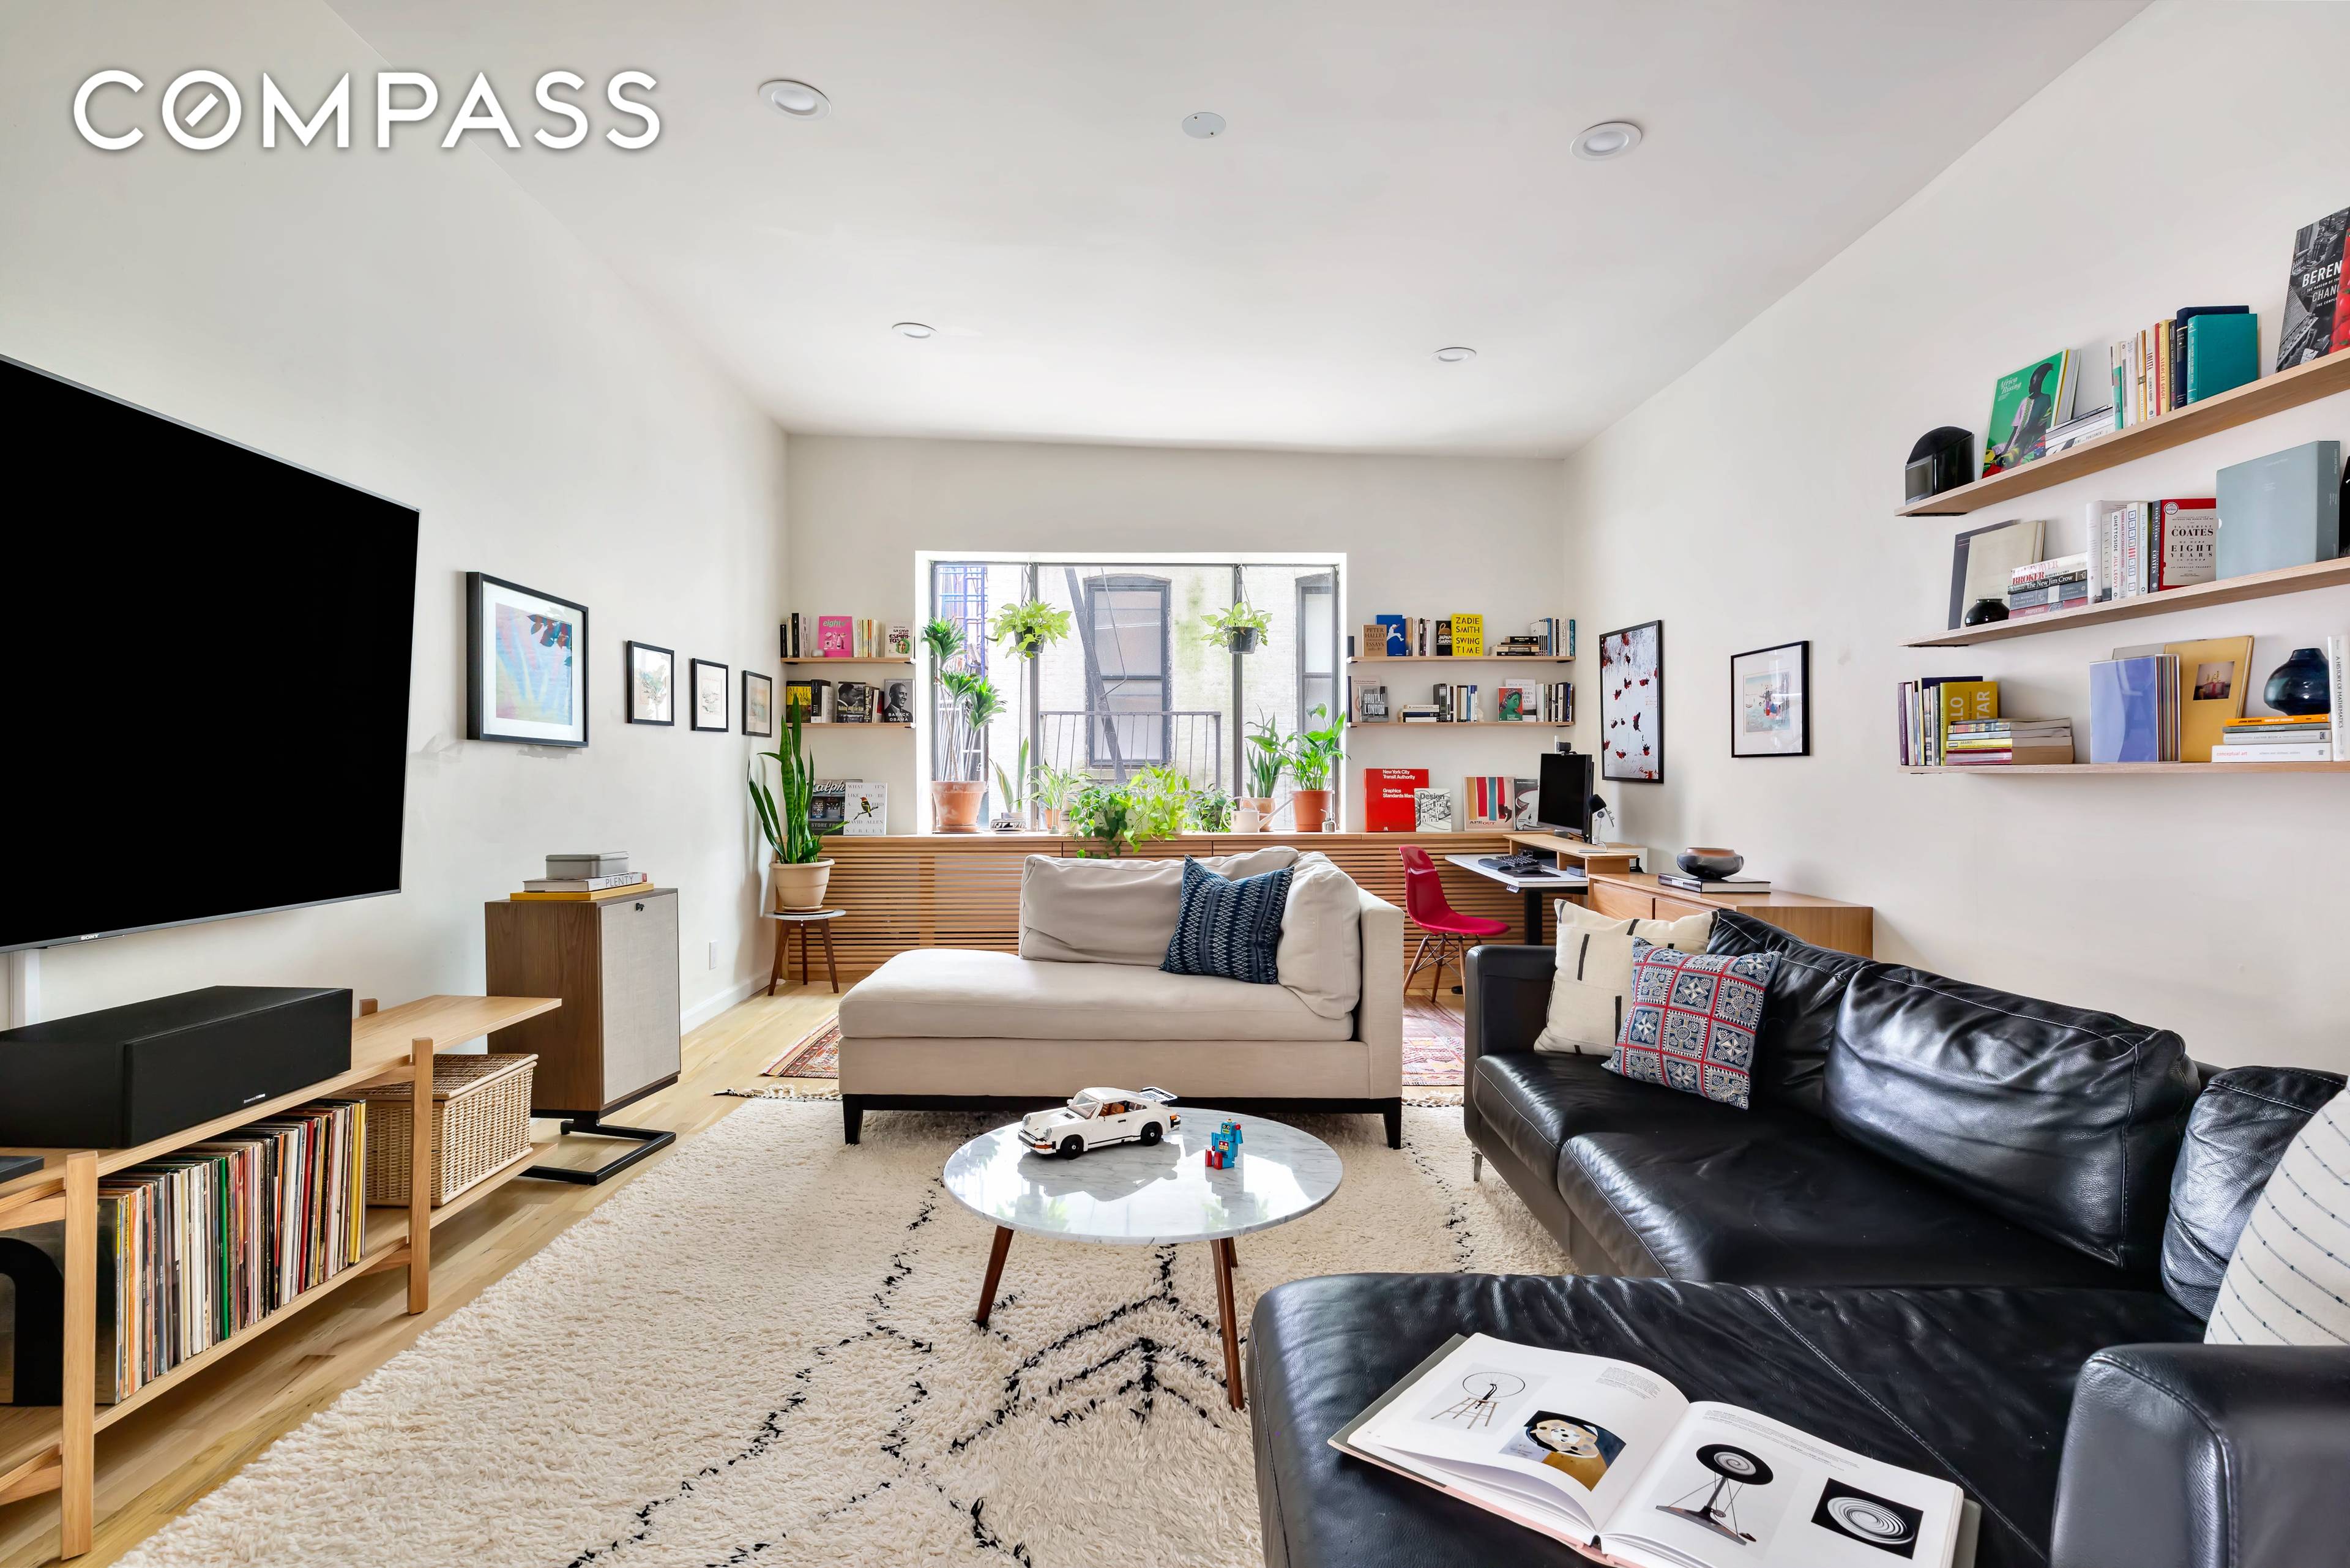 This exceptional one bedroom loft will captivate you with its soaring ceilings and chic design.